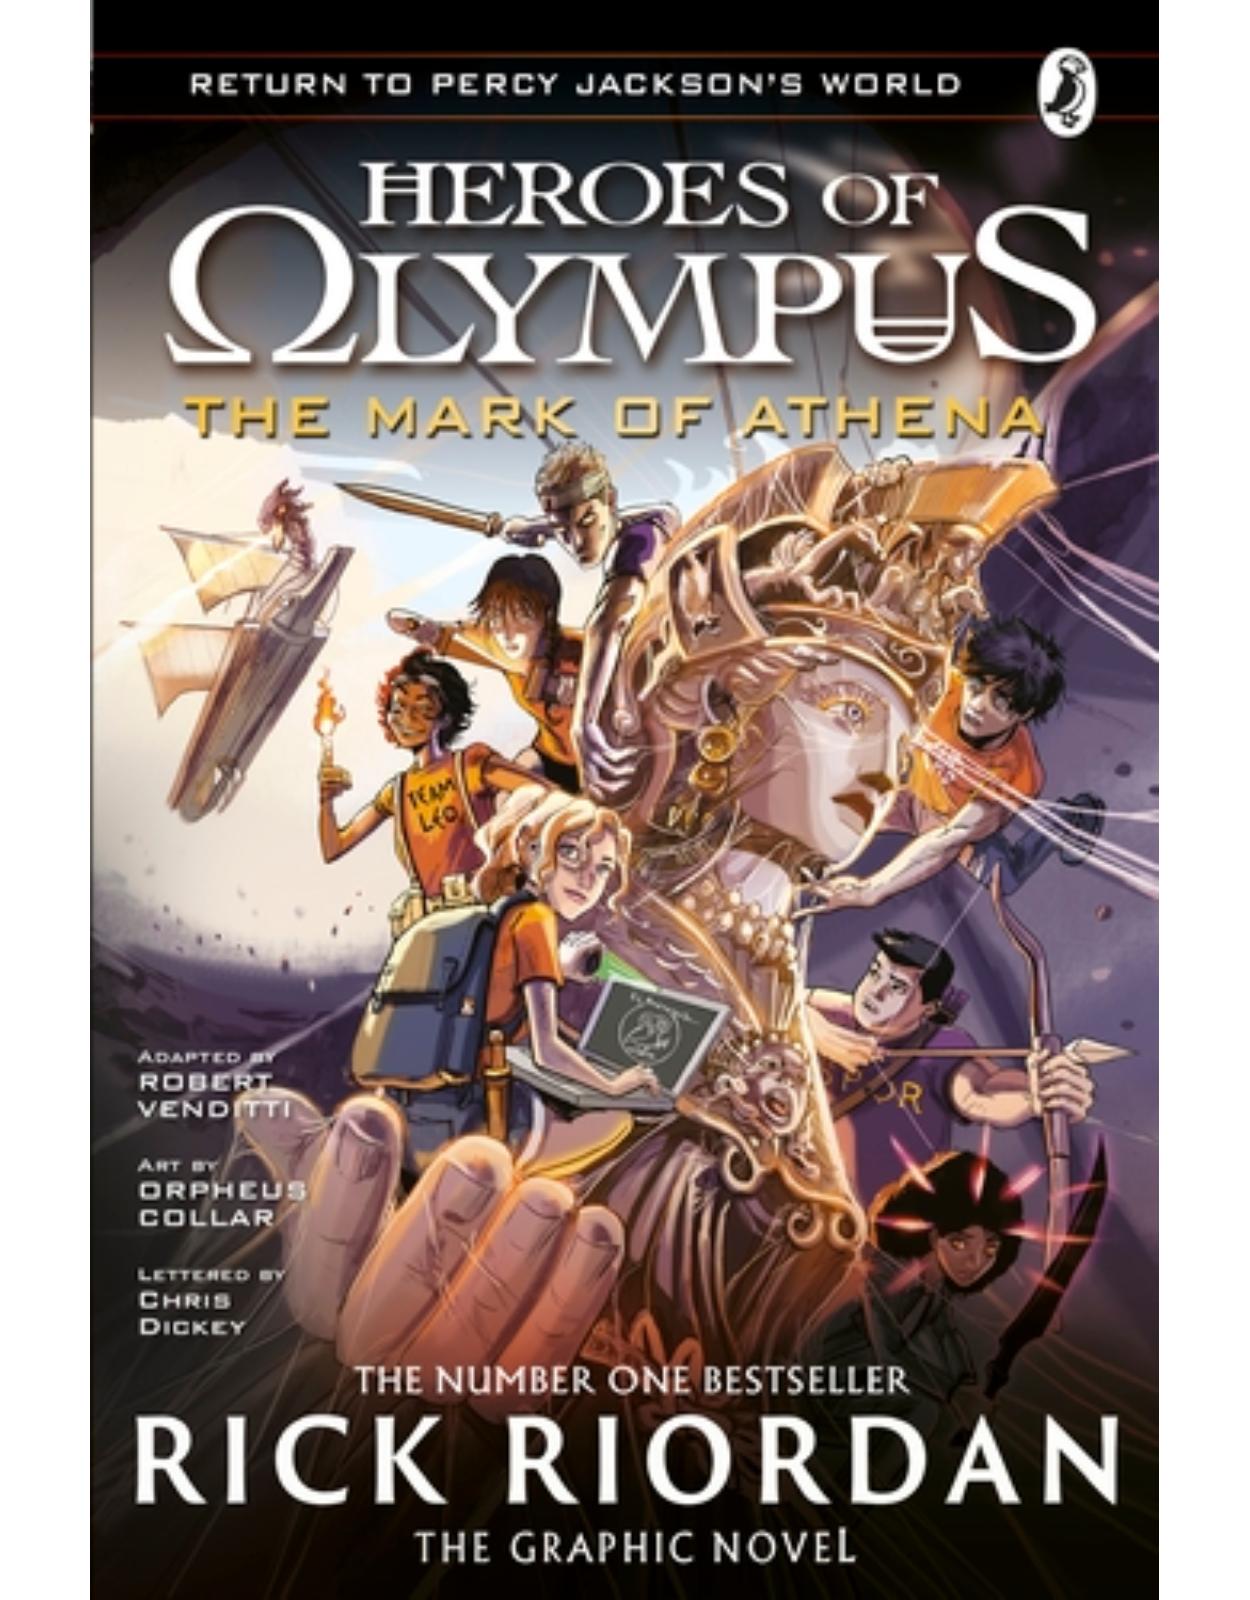 The Mark of Athena: The Graphic Novel 